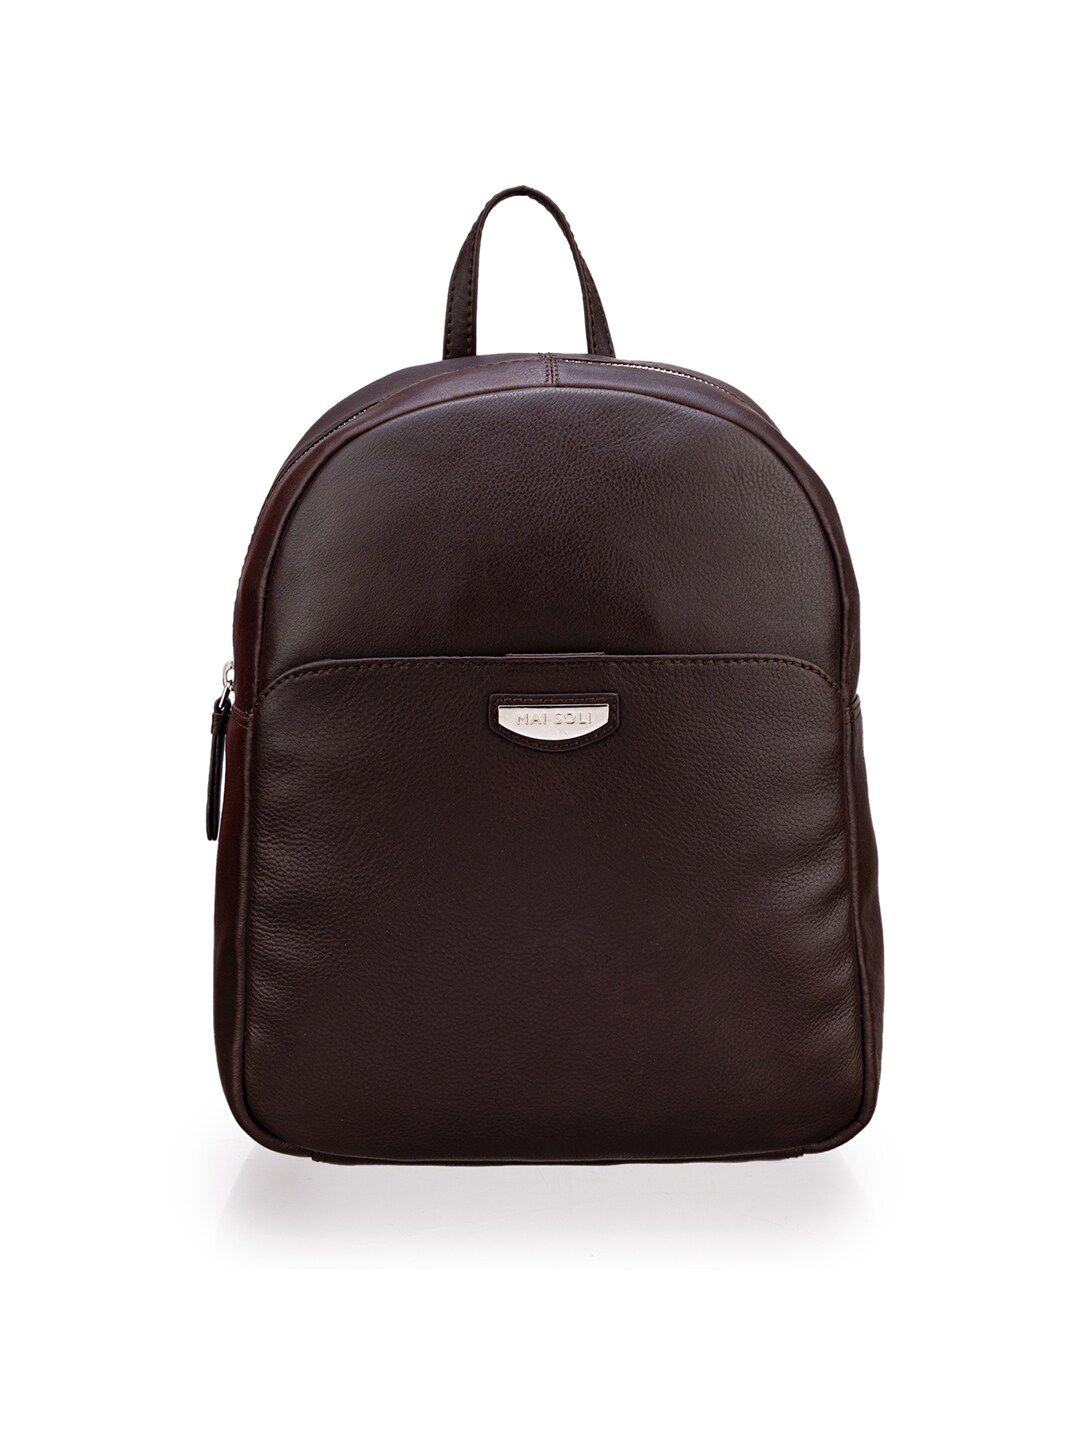 MAI SOLI Women Brown Leather Backpacks Price in India